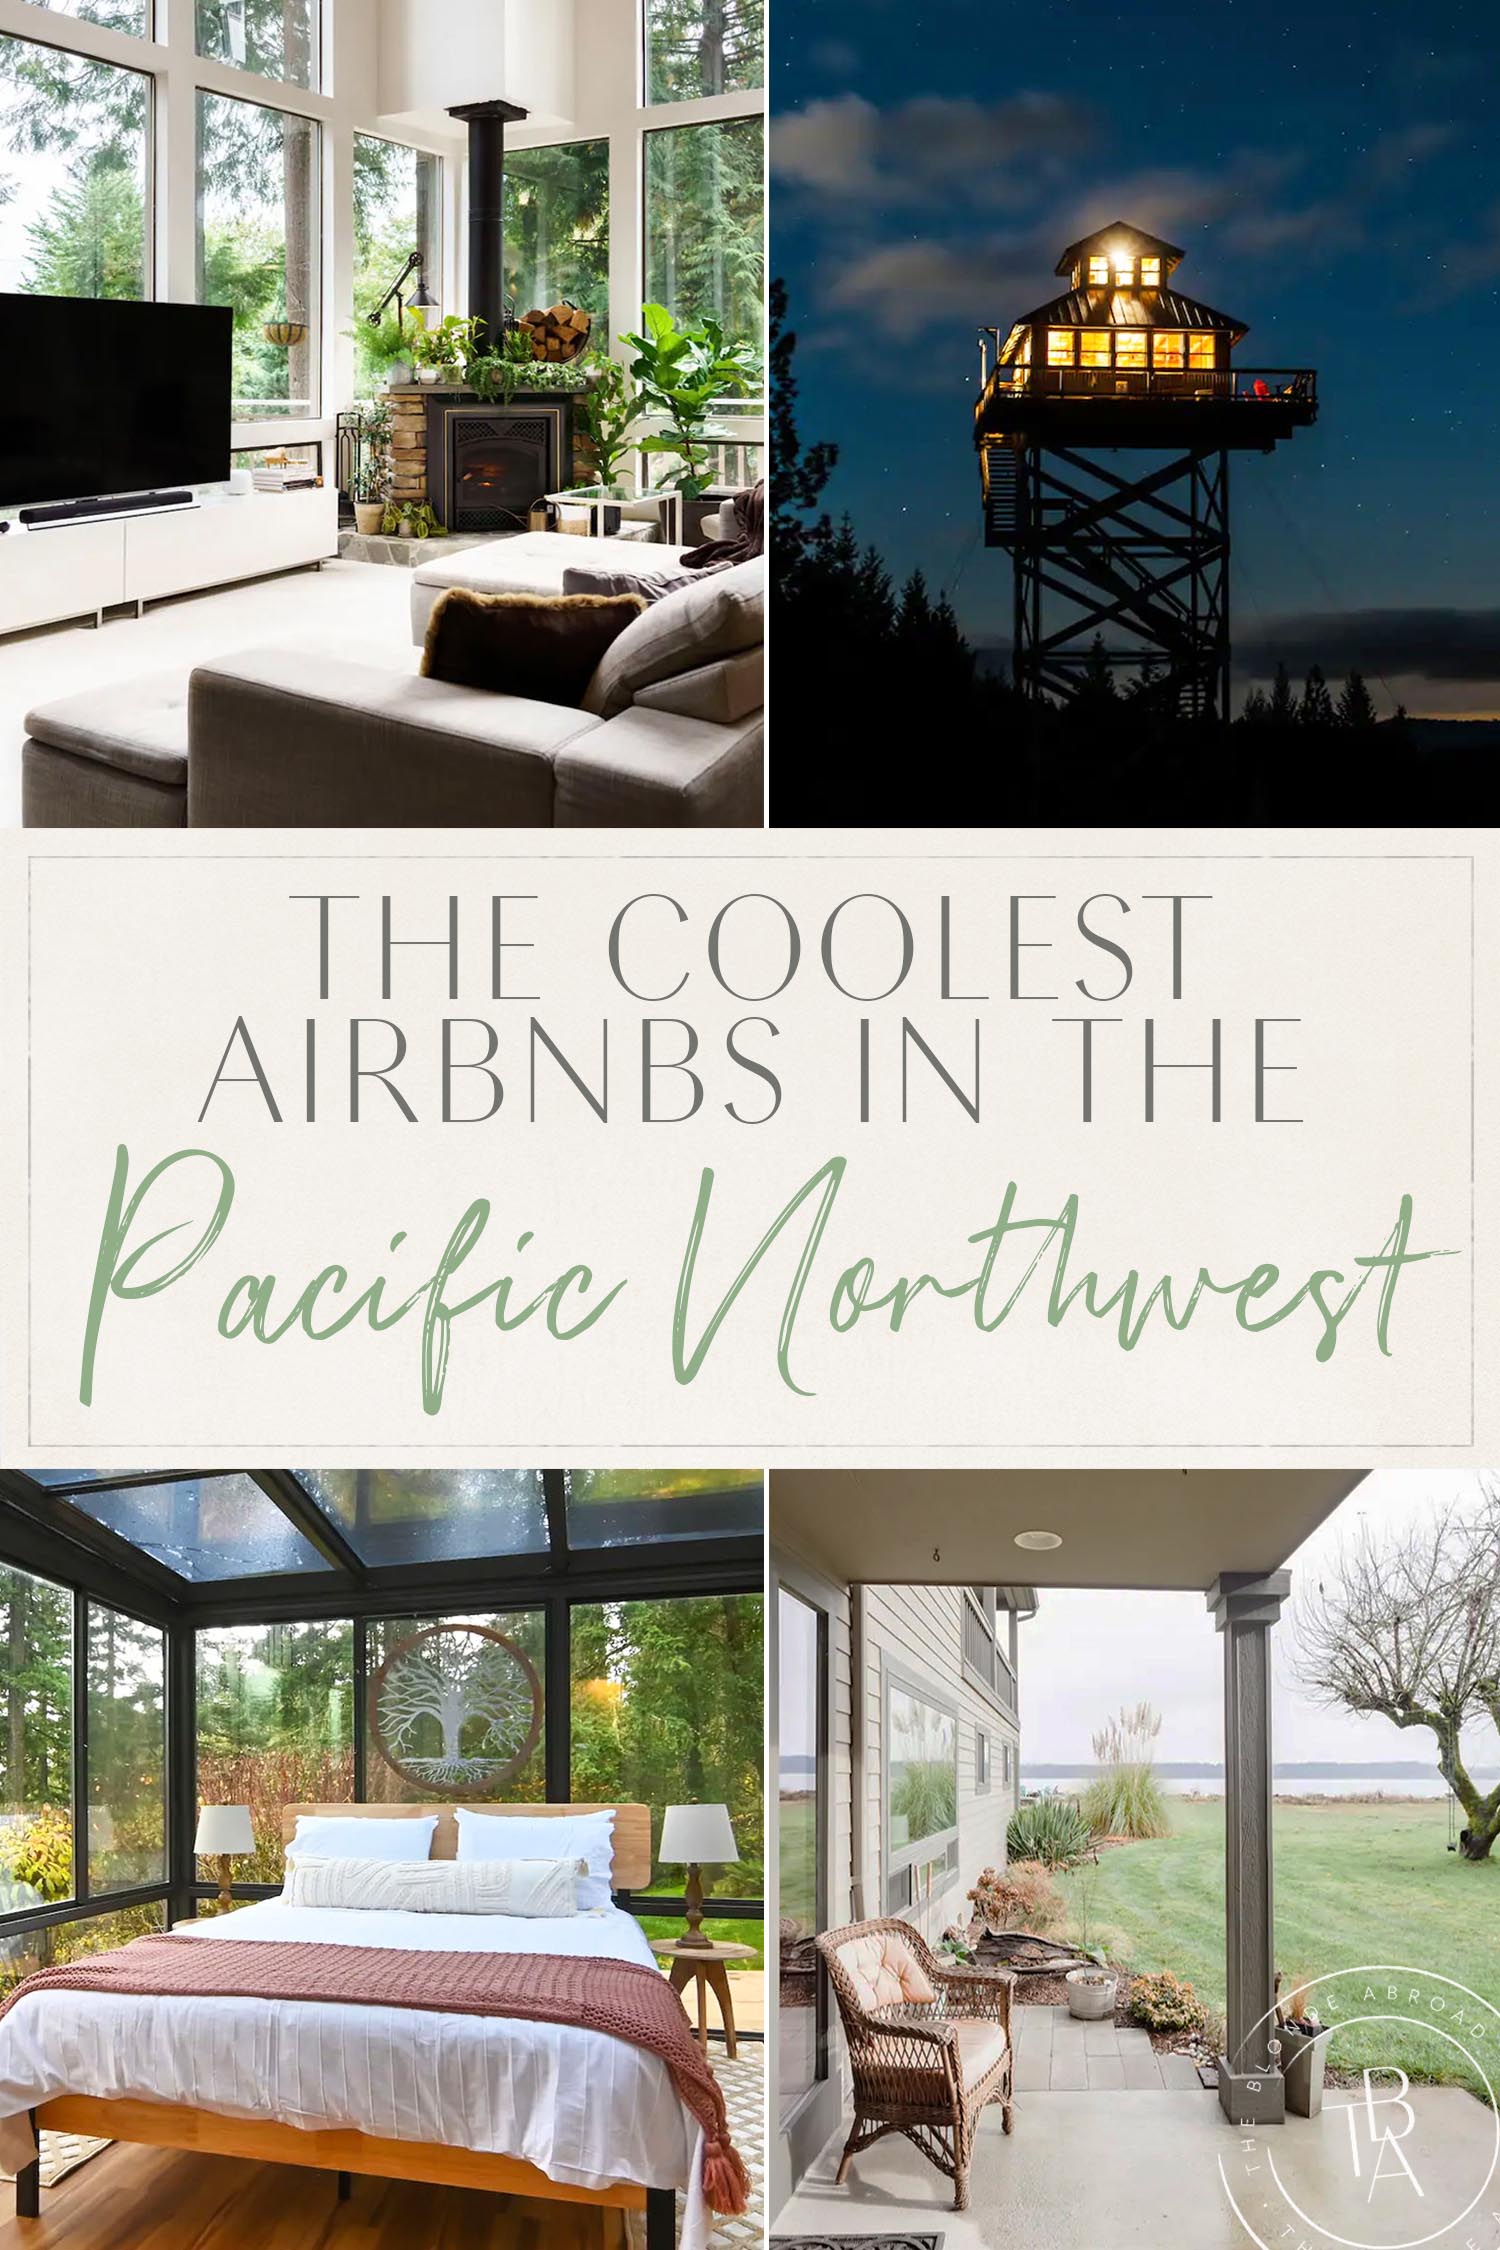 Pacific Northwest Airbnbs